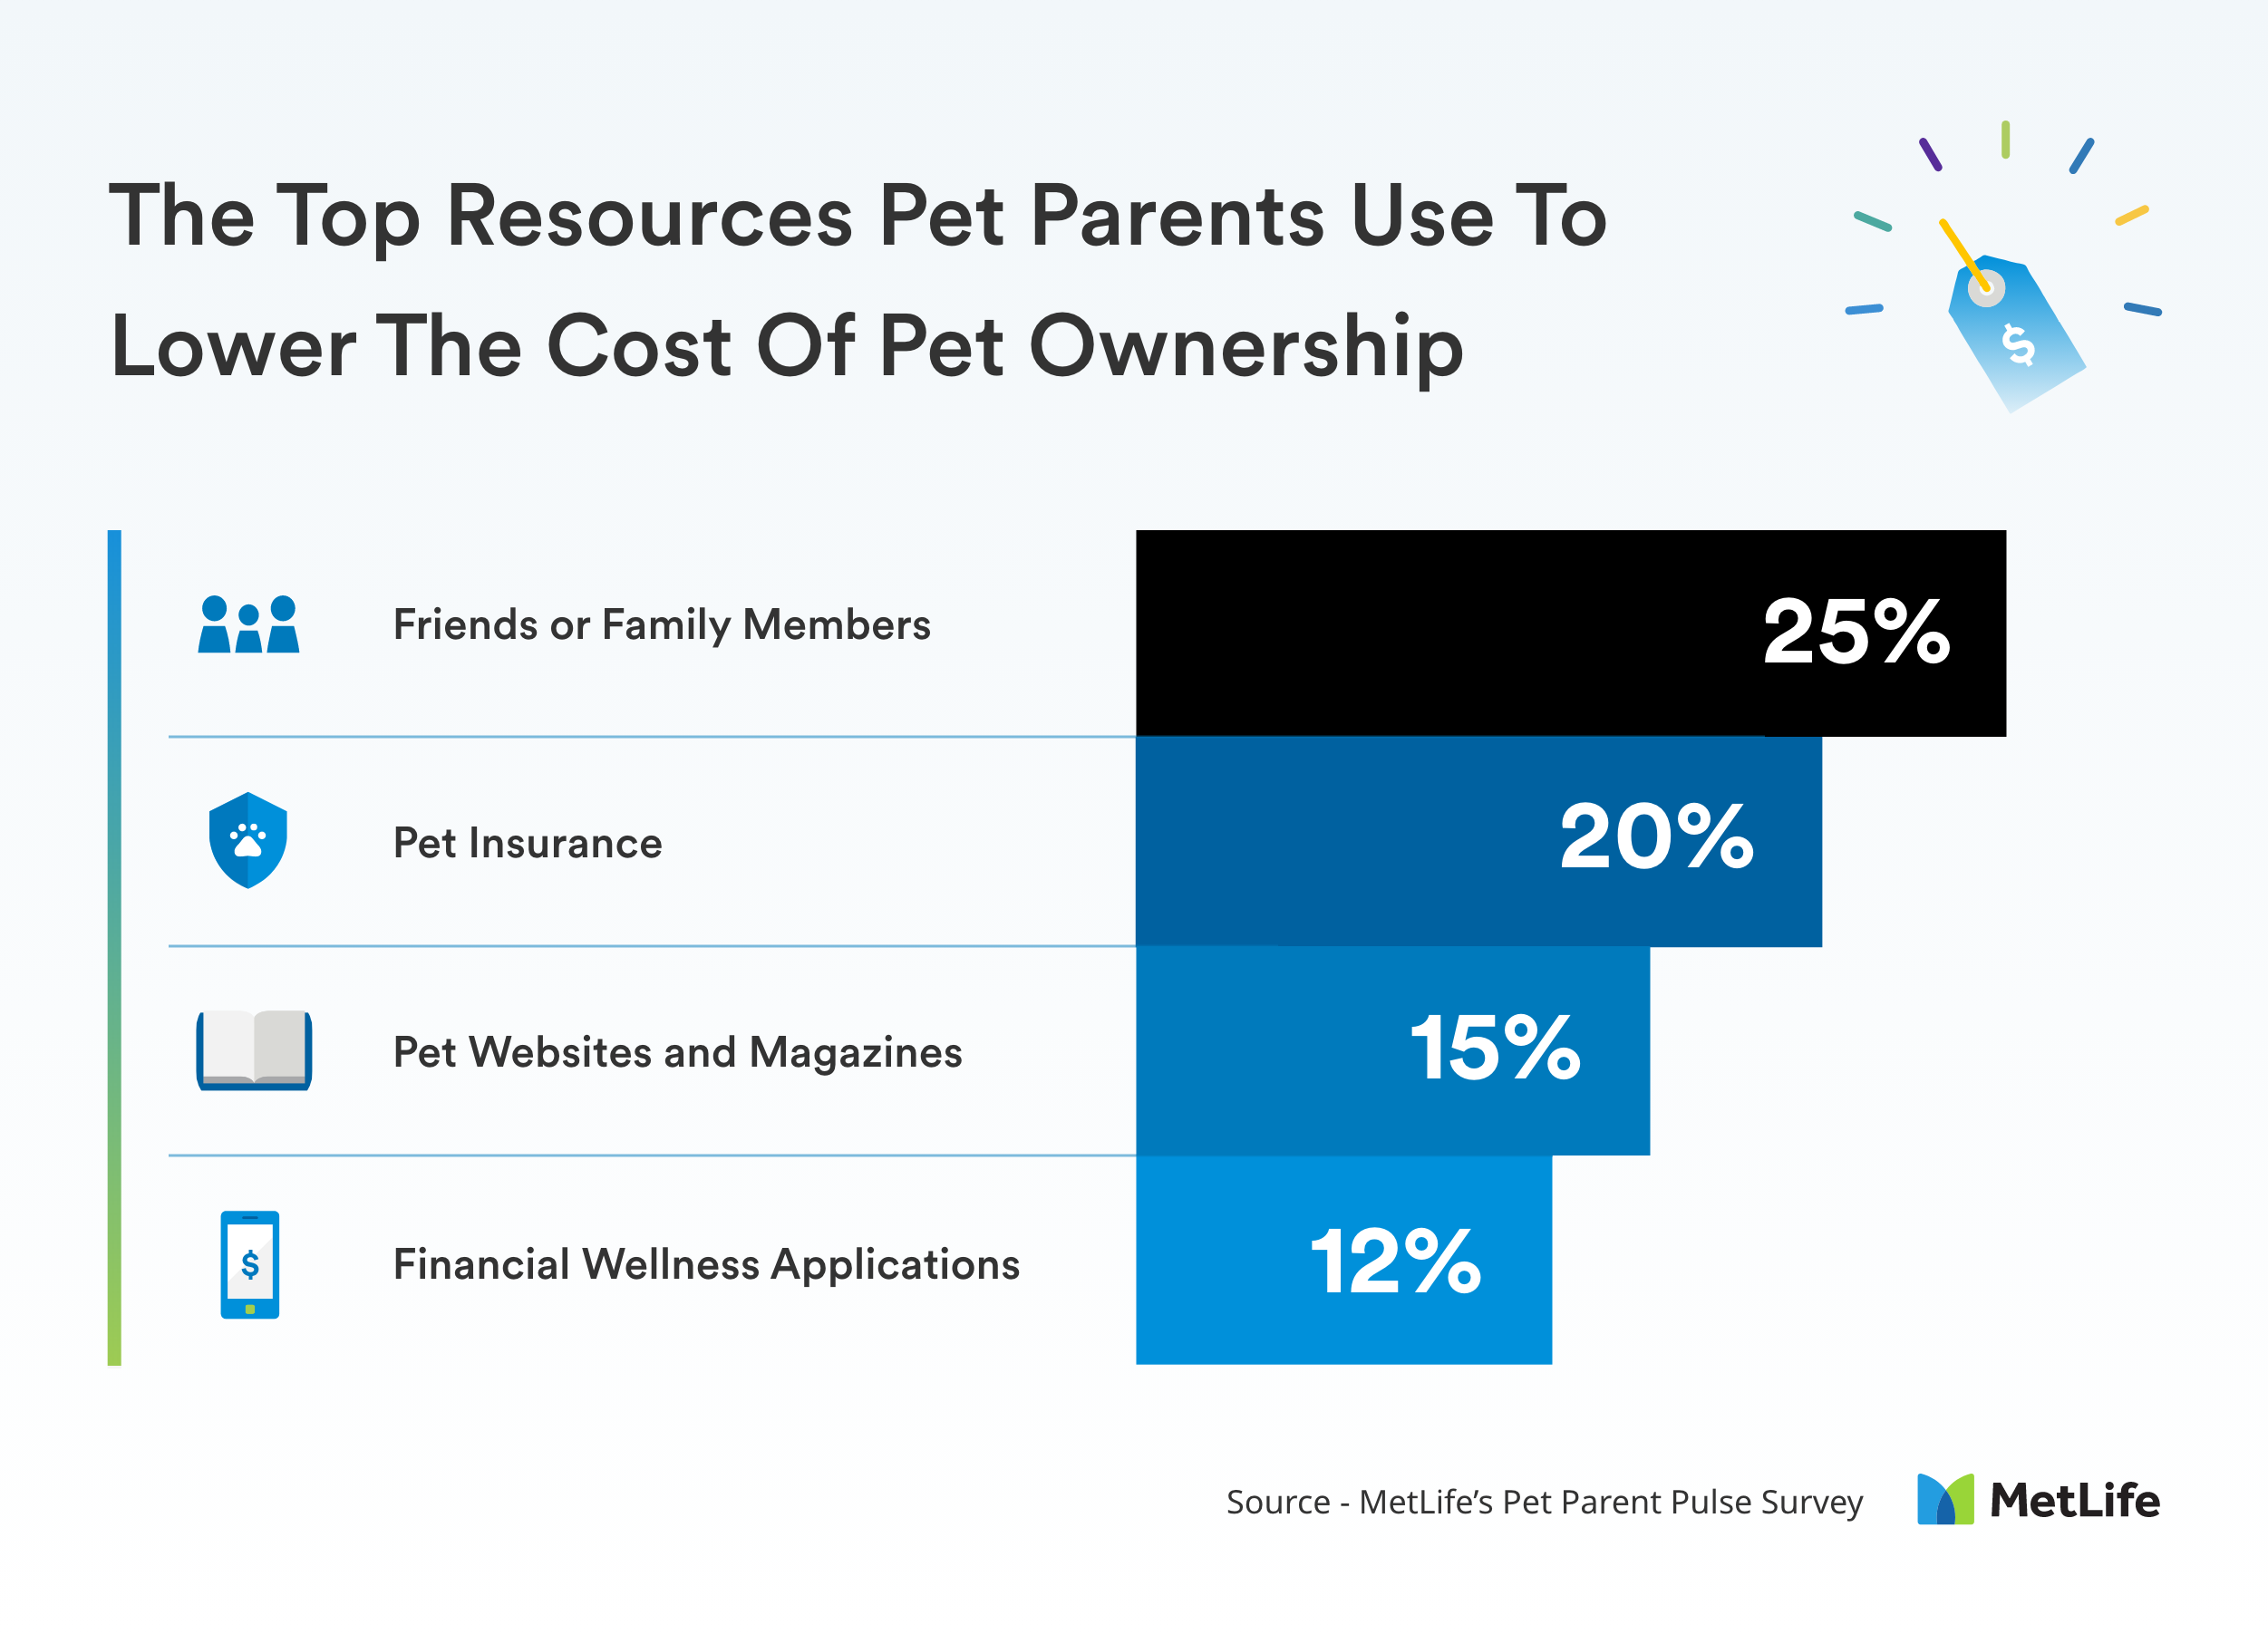 Resources Pet Parents Use to Lower Their Costs: 25% friends/family; 20% pet insurance; 15% pet websites/magazines; 12% financial apps